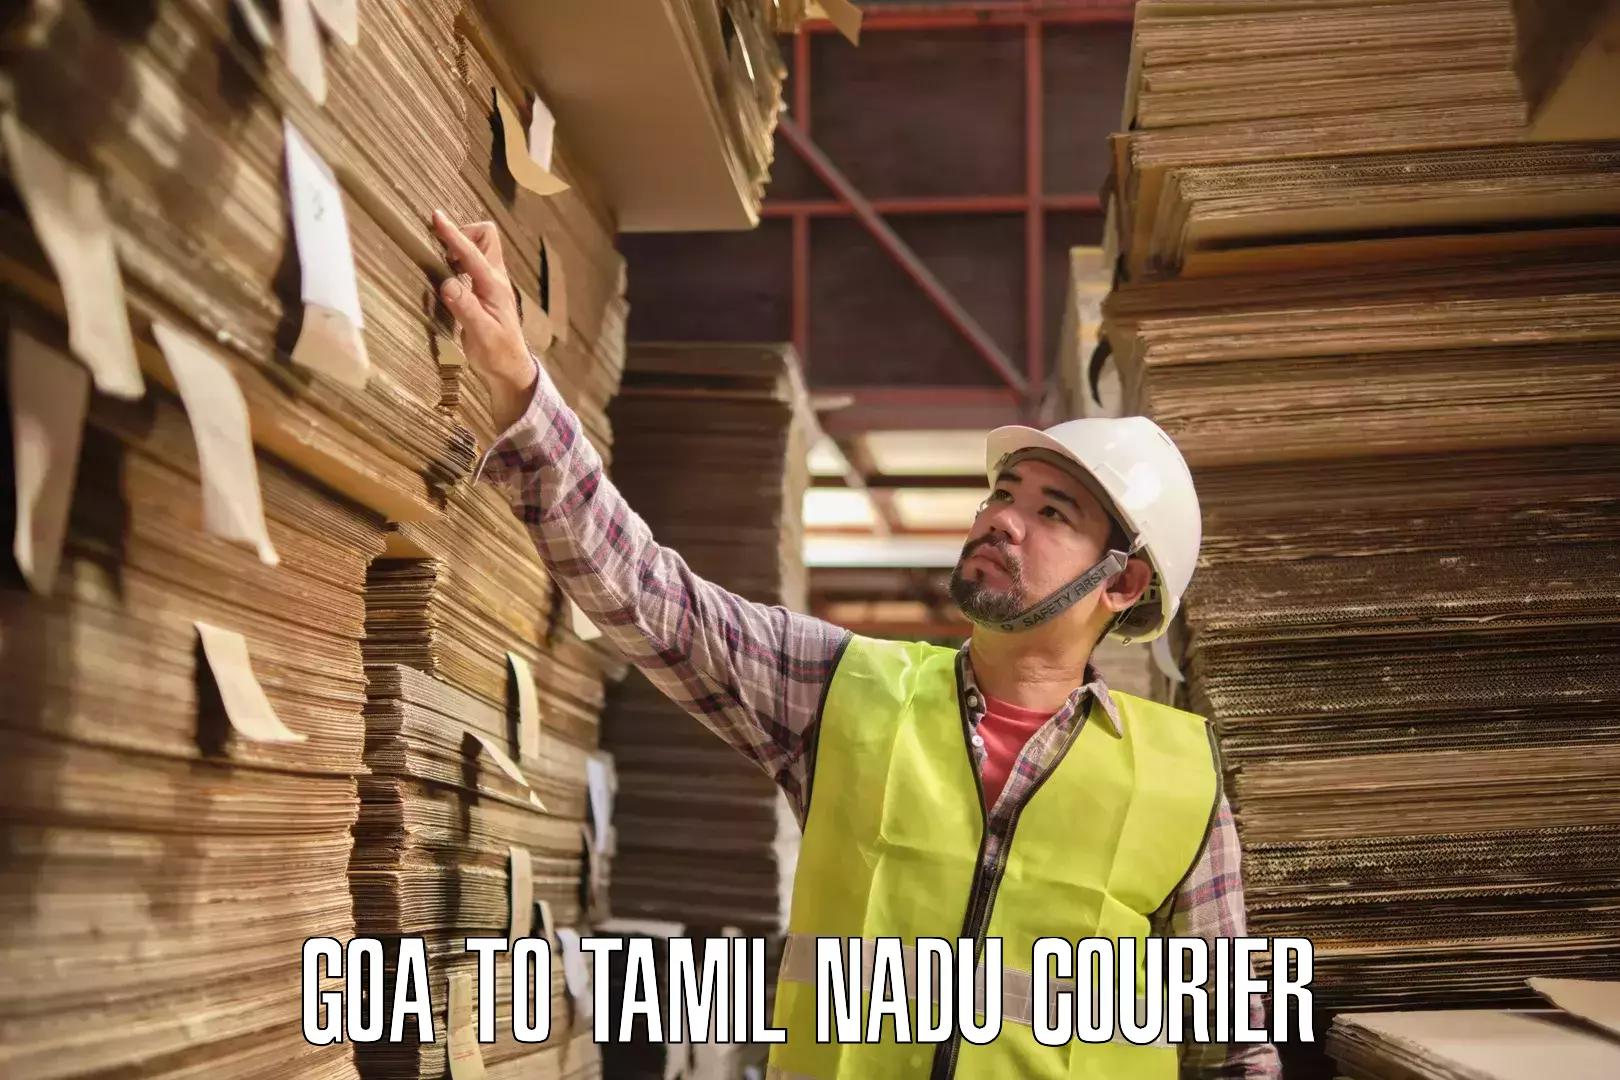 Secure shipping methods Goa to Tamil Nadu